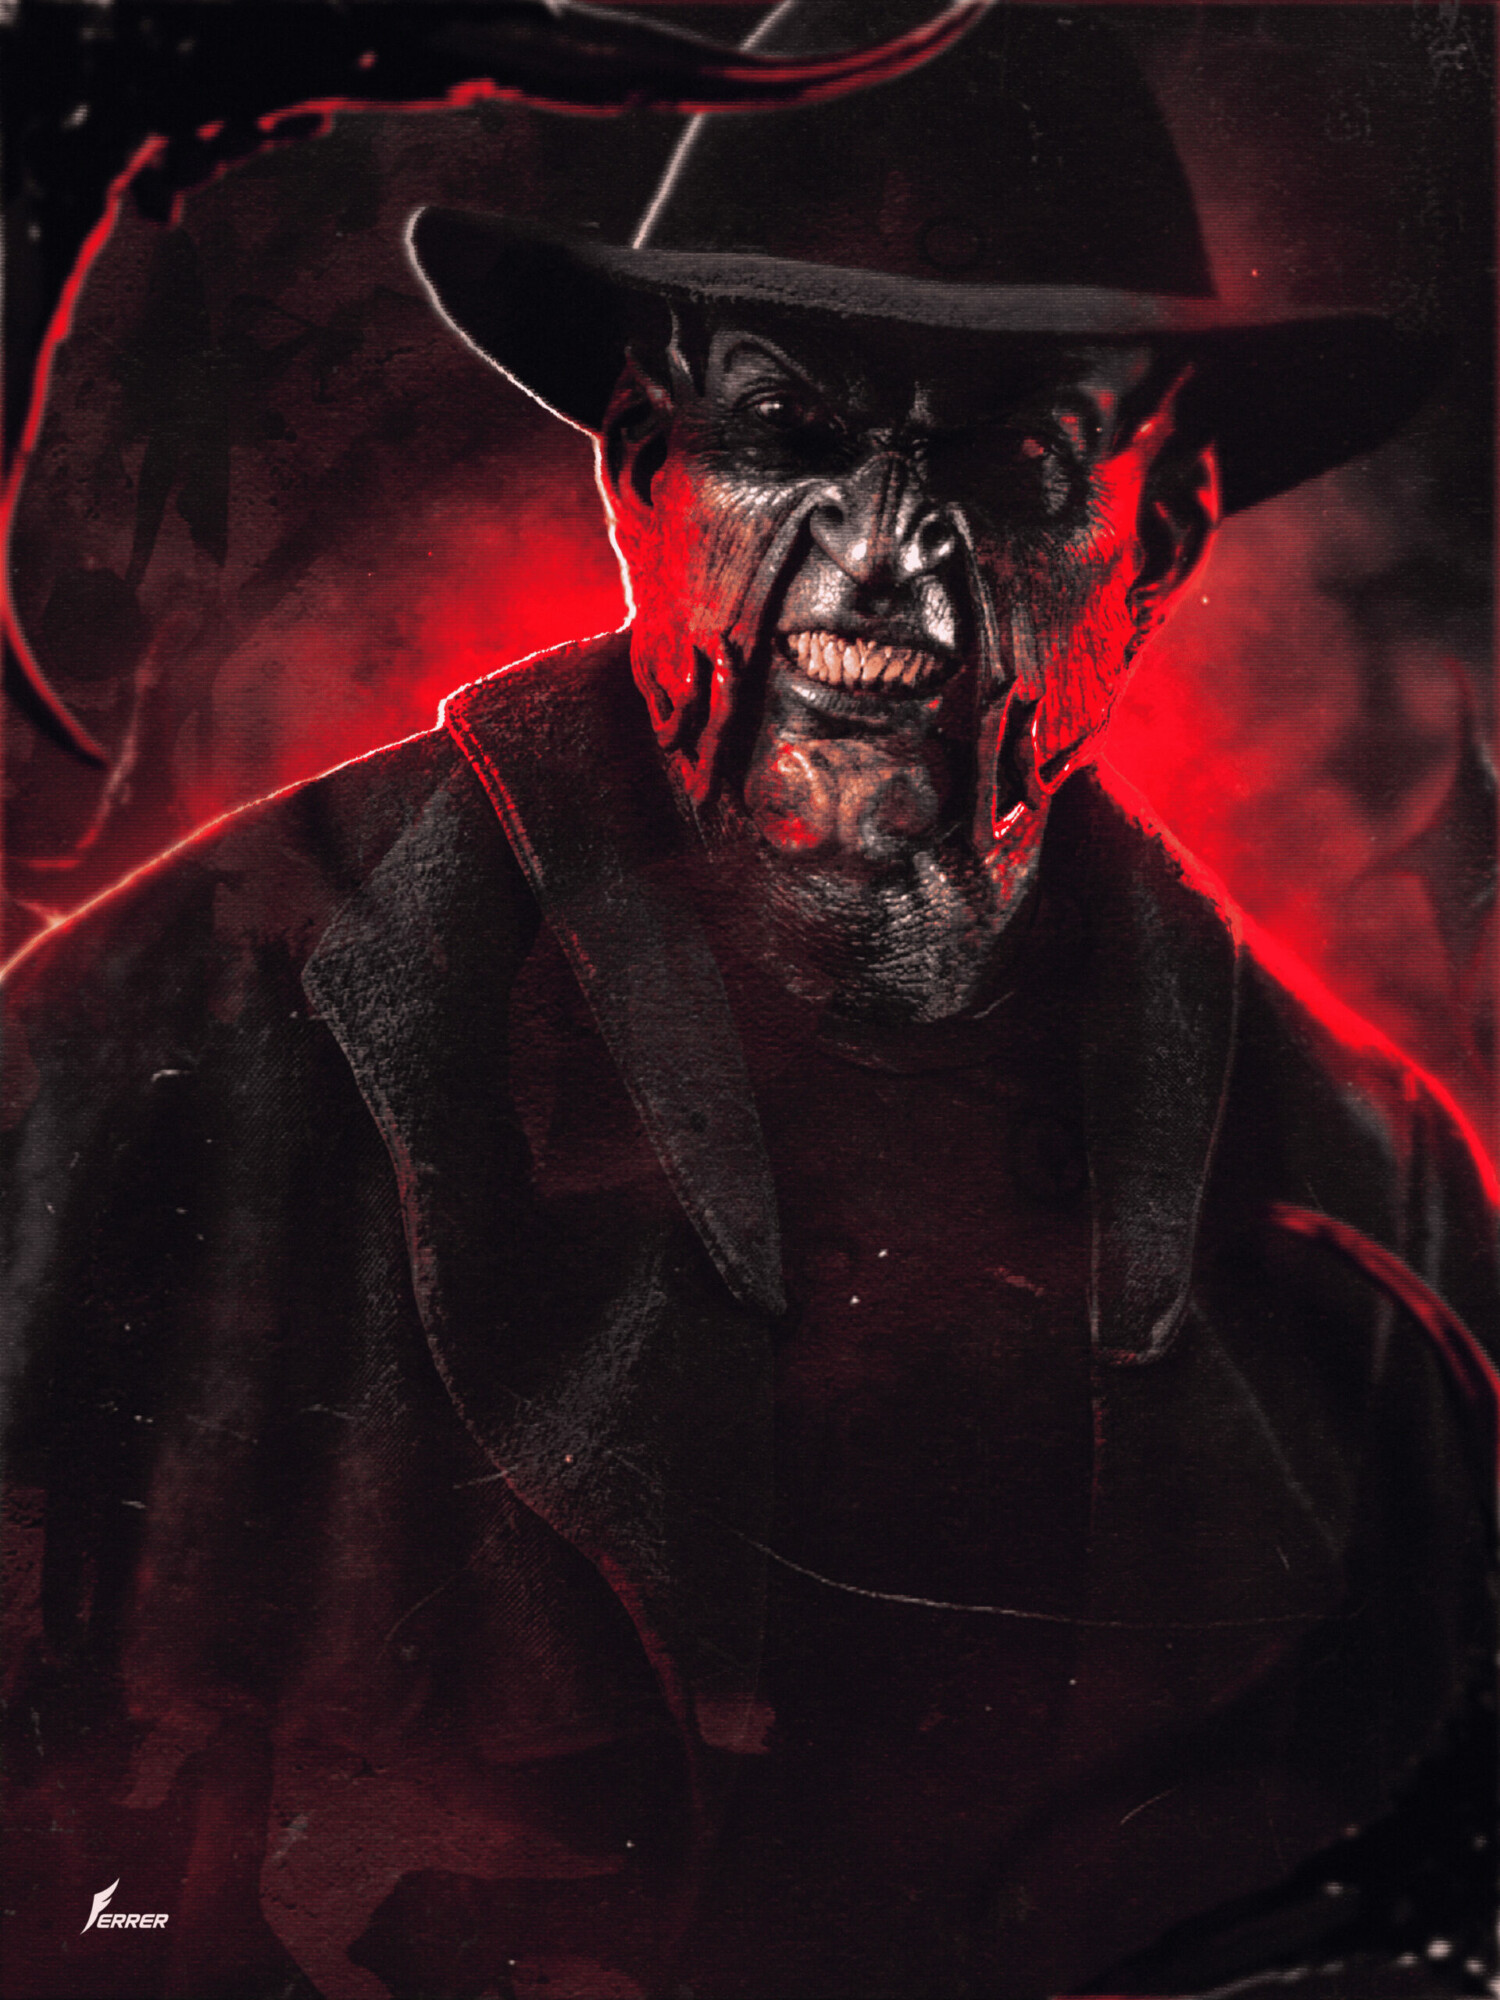 JEEPERS CREEPERS (2001) Poster ART